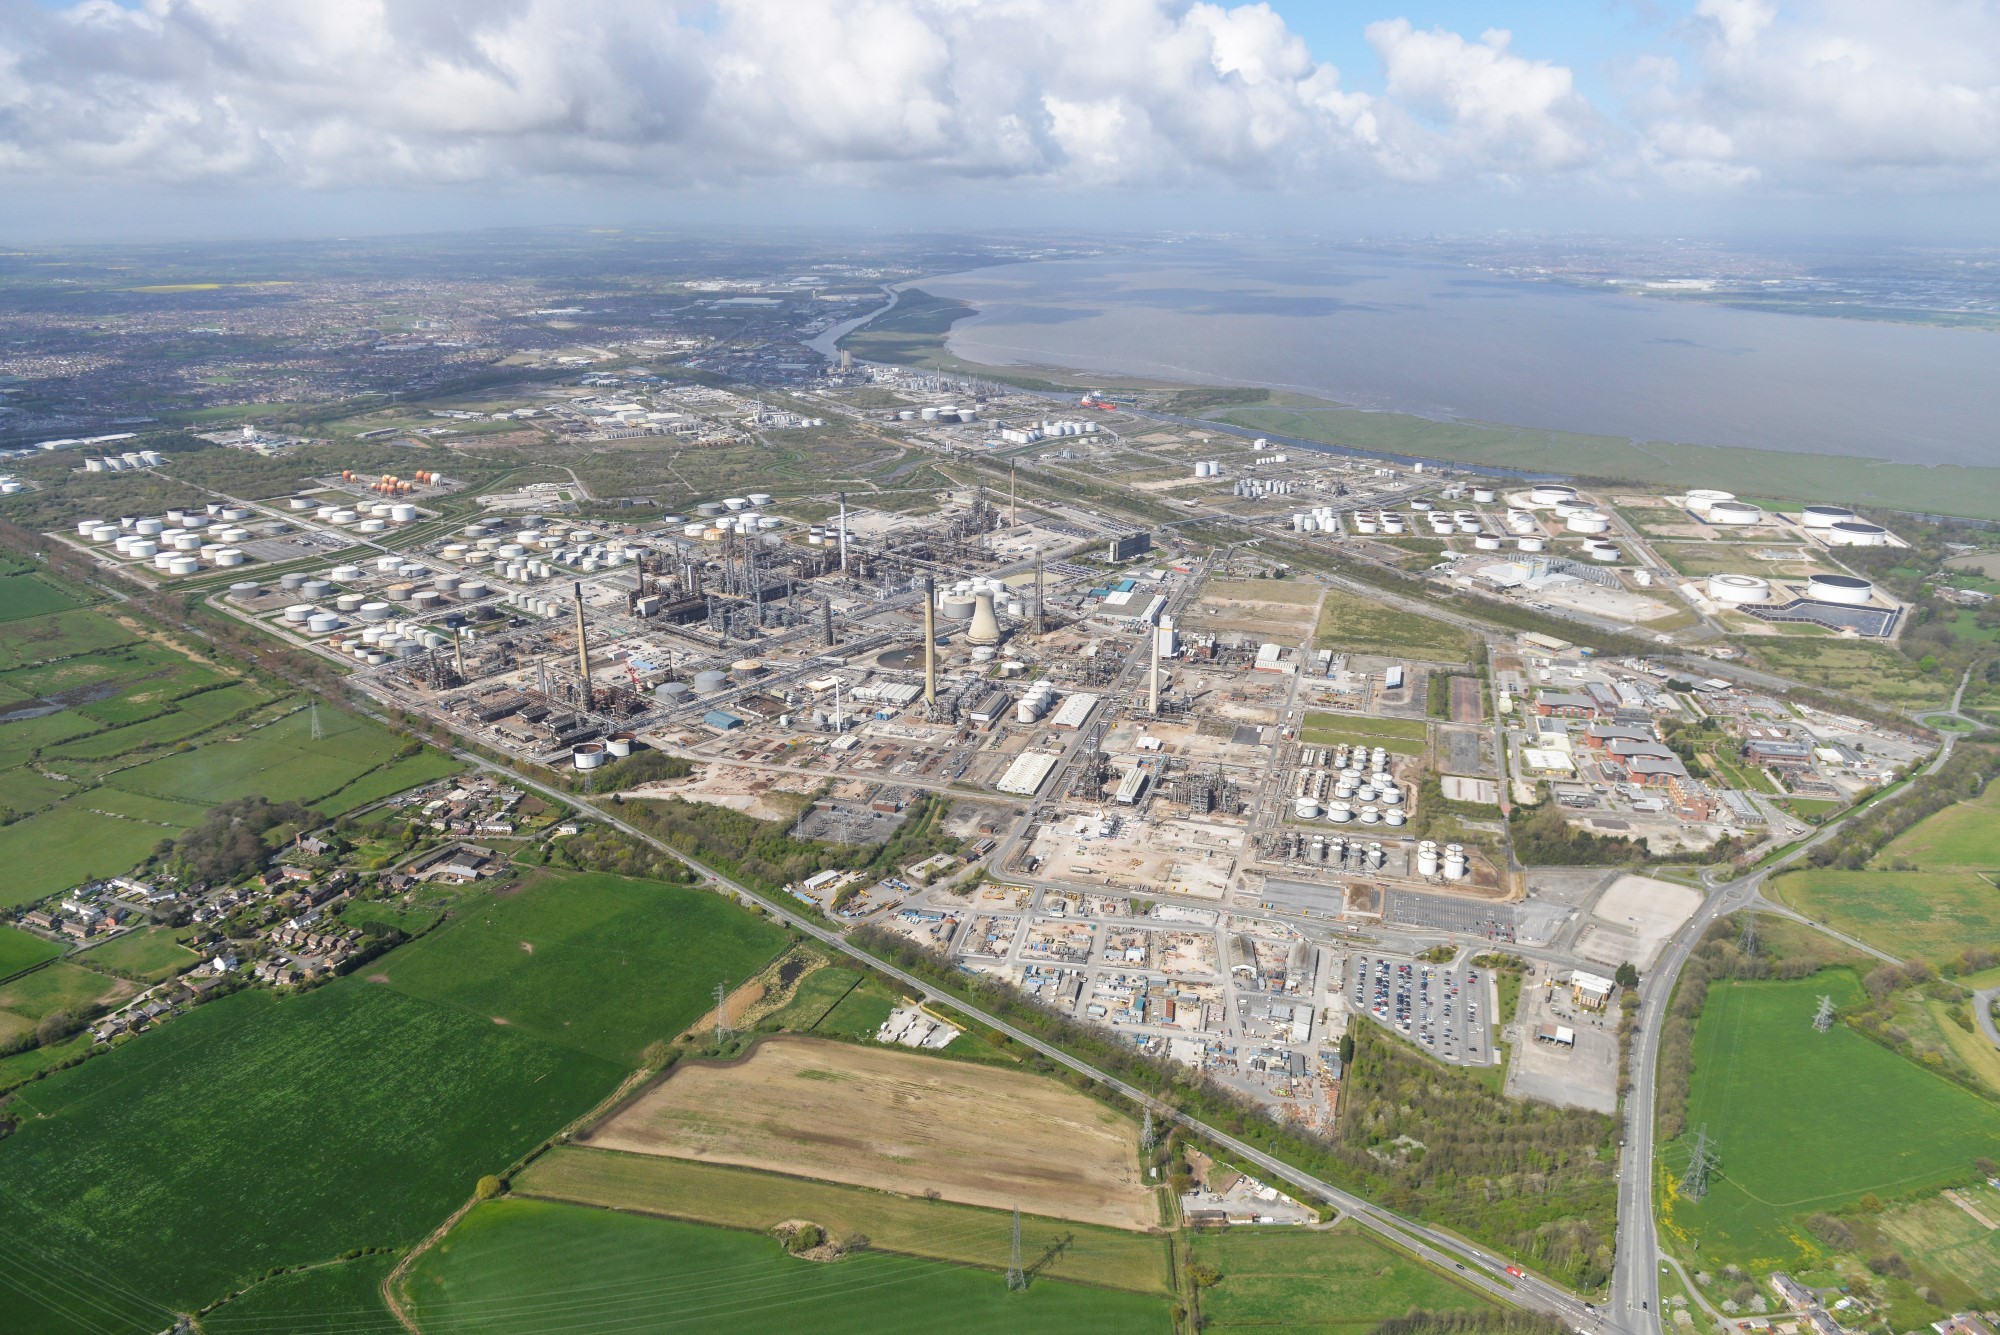 EETs new hydrogen-ready combined heat and power plant will be built at the Stanlow refinery.